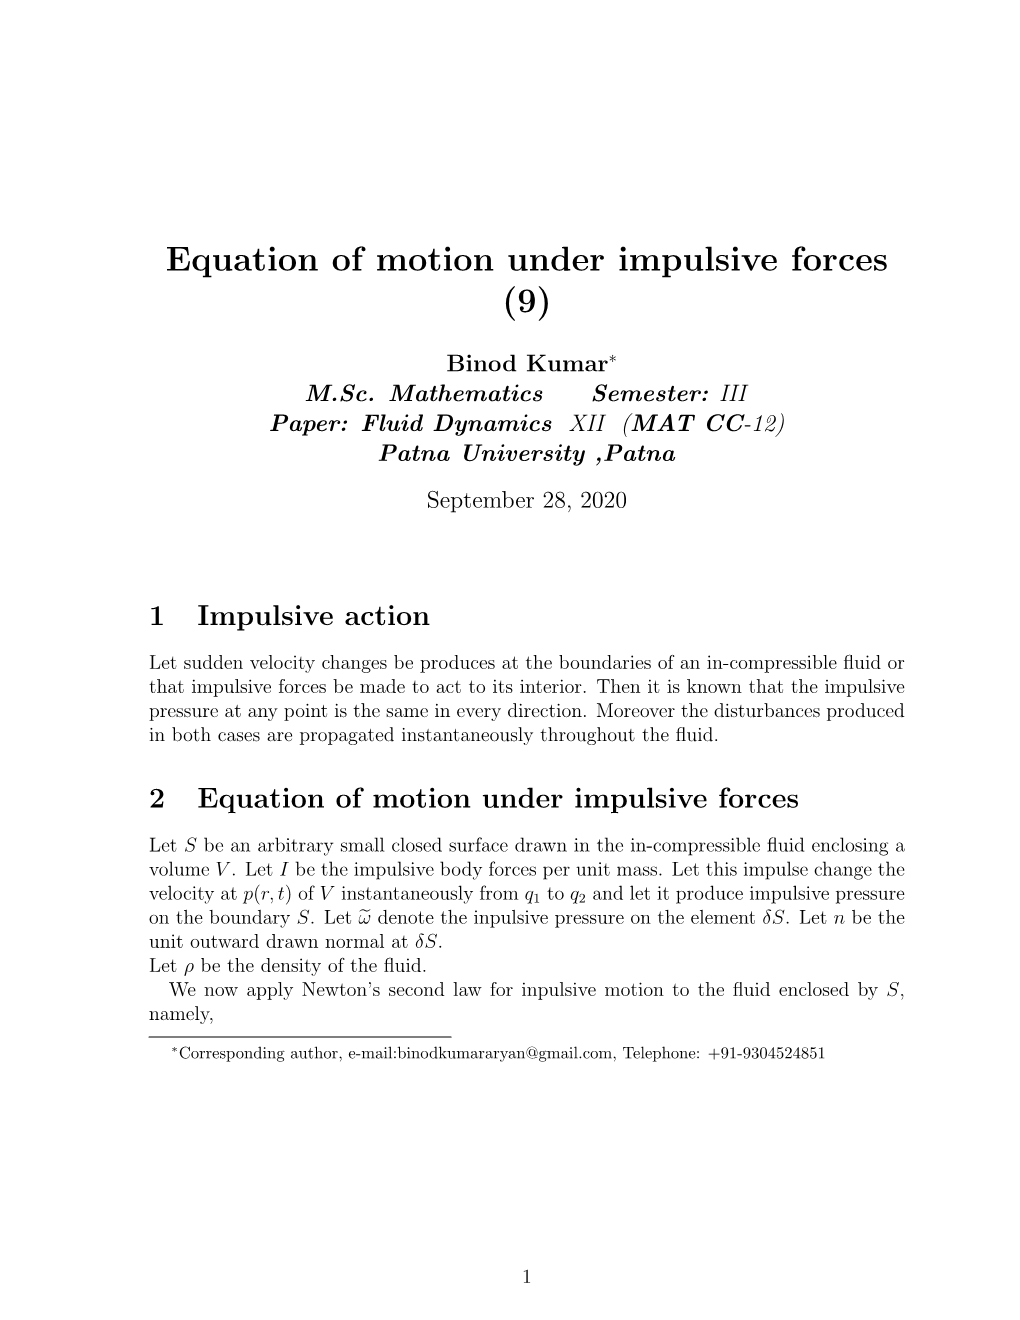 Equation of Motion Under Impulsive Forces (9)